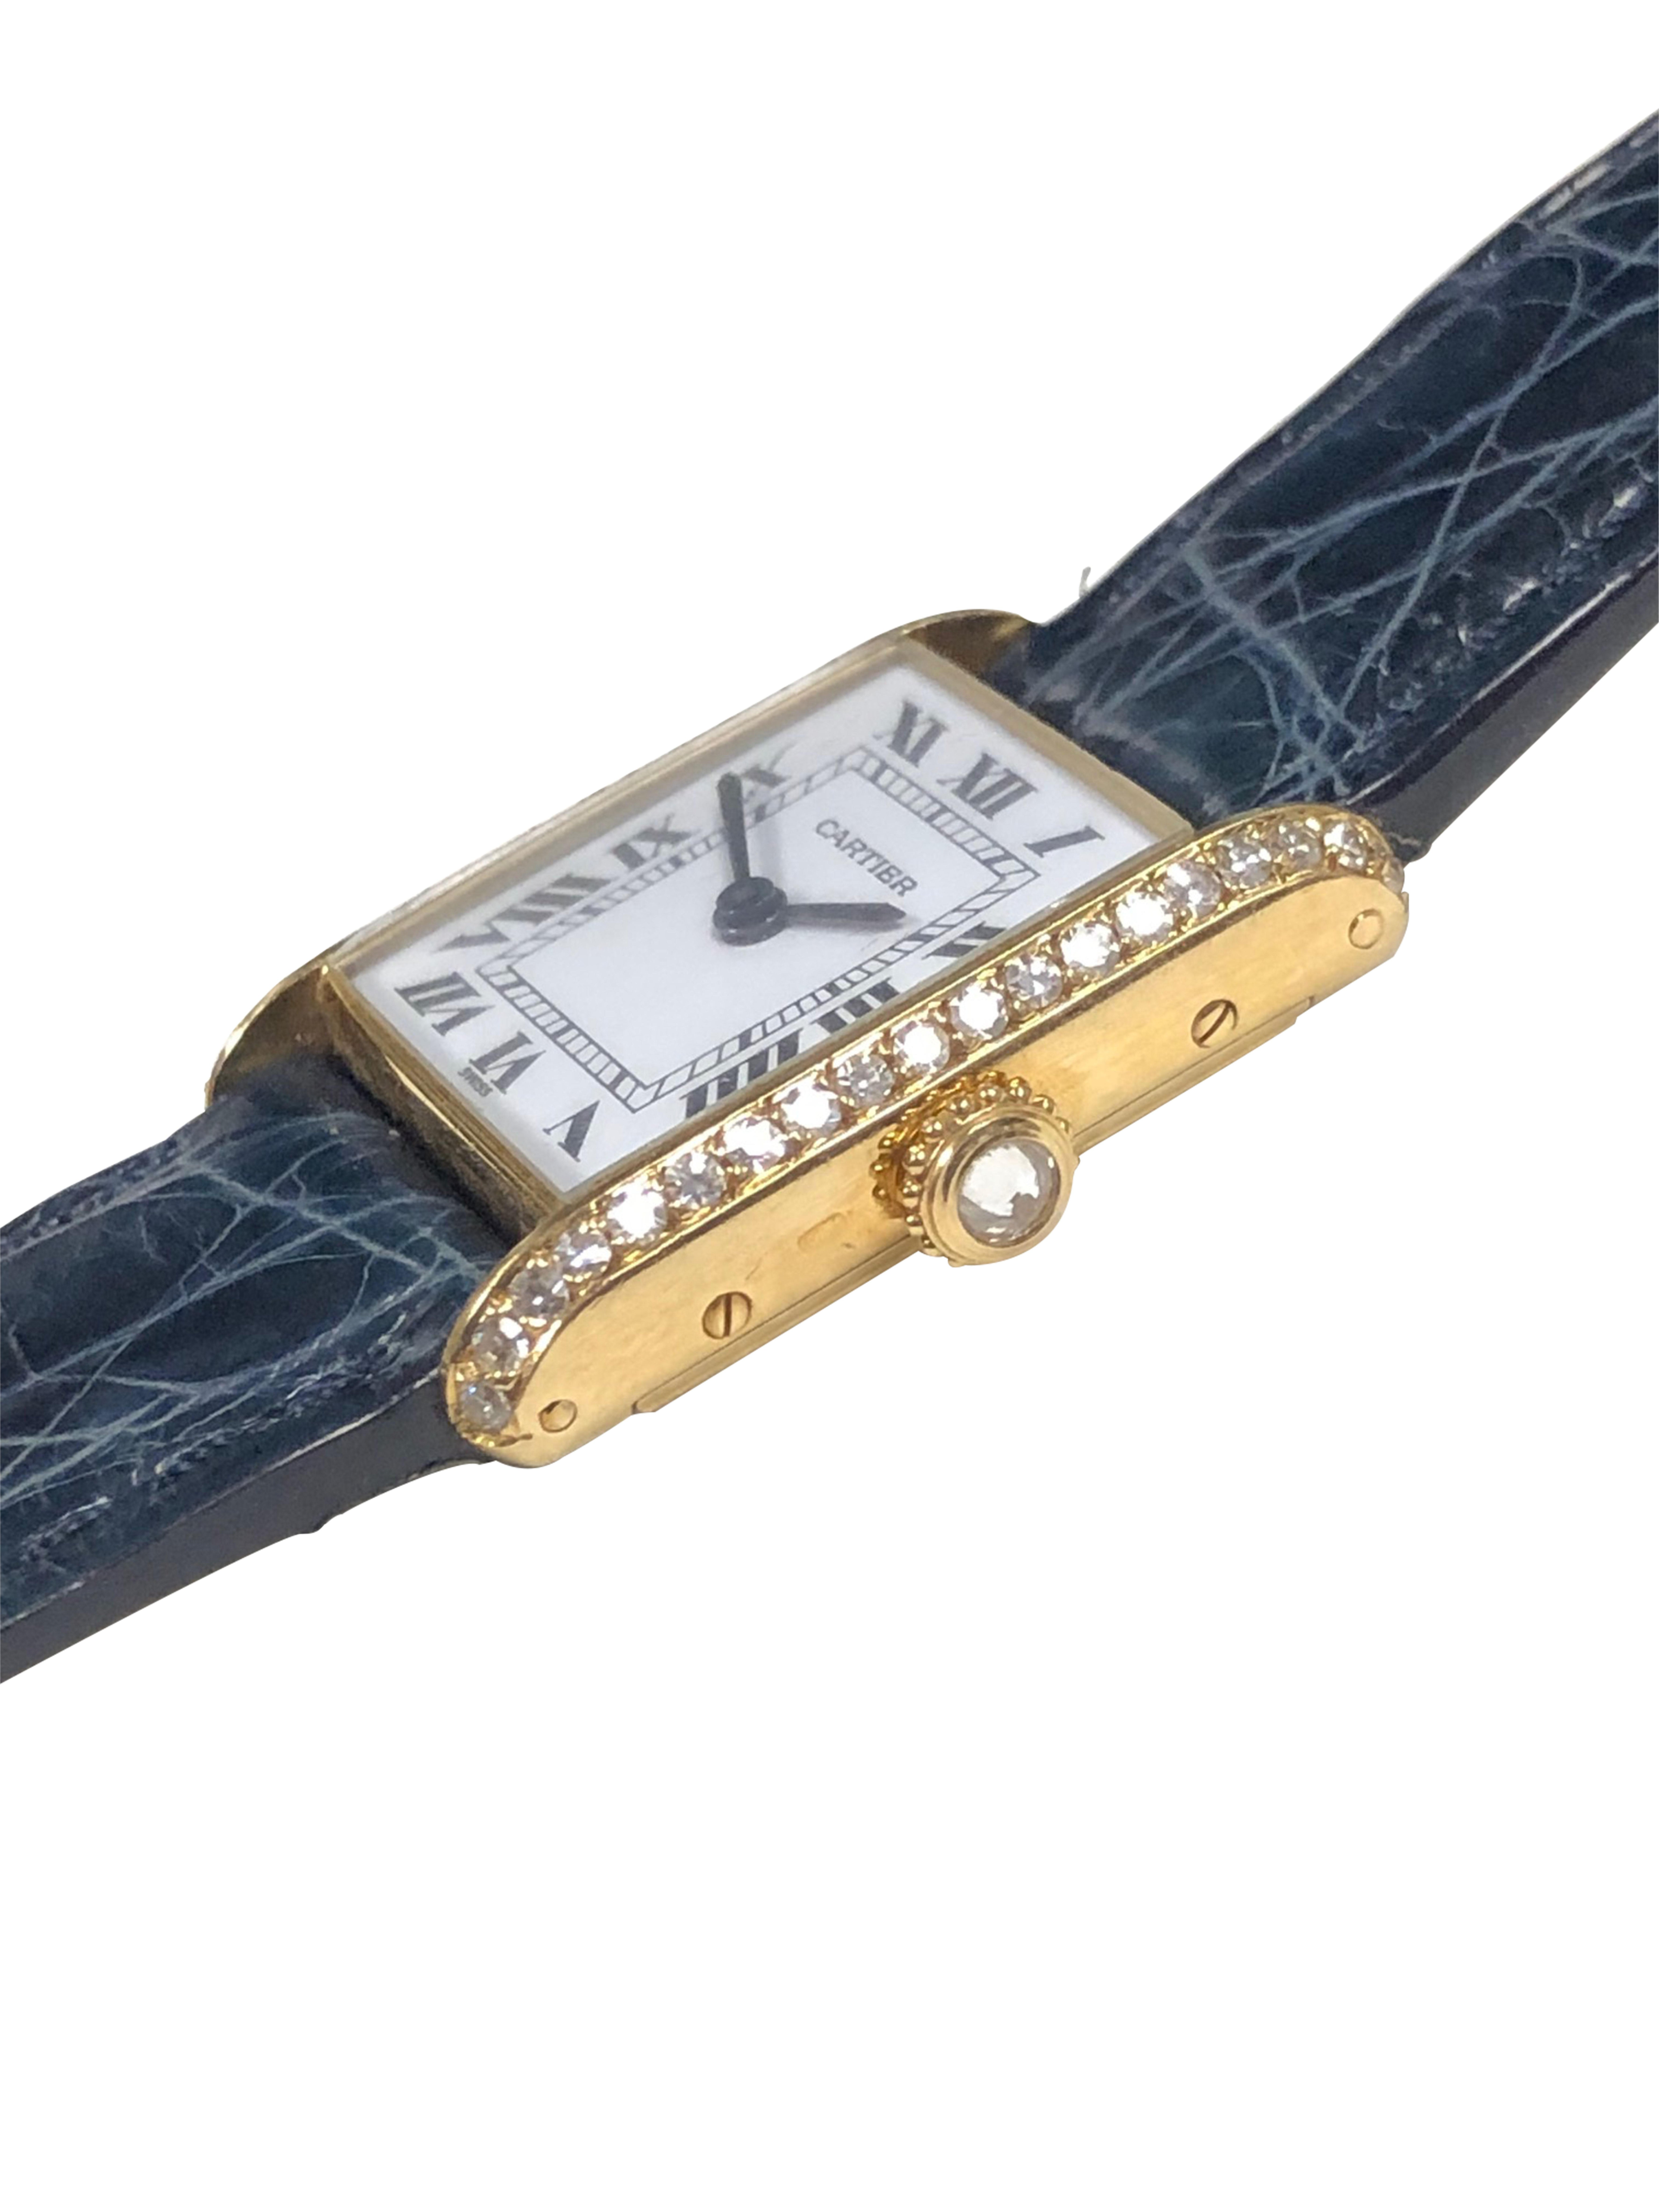 Circa 2000 Cartier Ladies Classic Tank Wrist watch, 25 X 19 M.M. 18K yellow Gold Case set on either side with Round Brilliant cut Diamonds totaling .40 Carat and a Diamond set crown. 17 Jewel mechanical, Manual Wind Movement. White Dial with Black